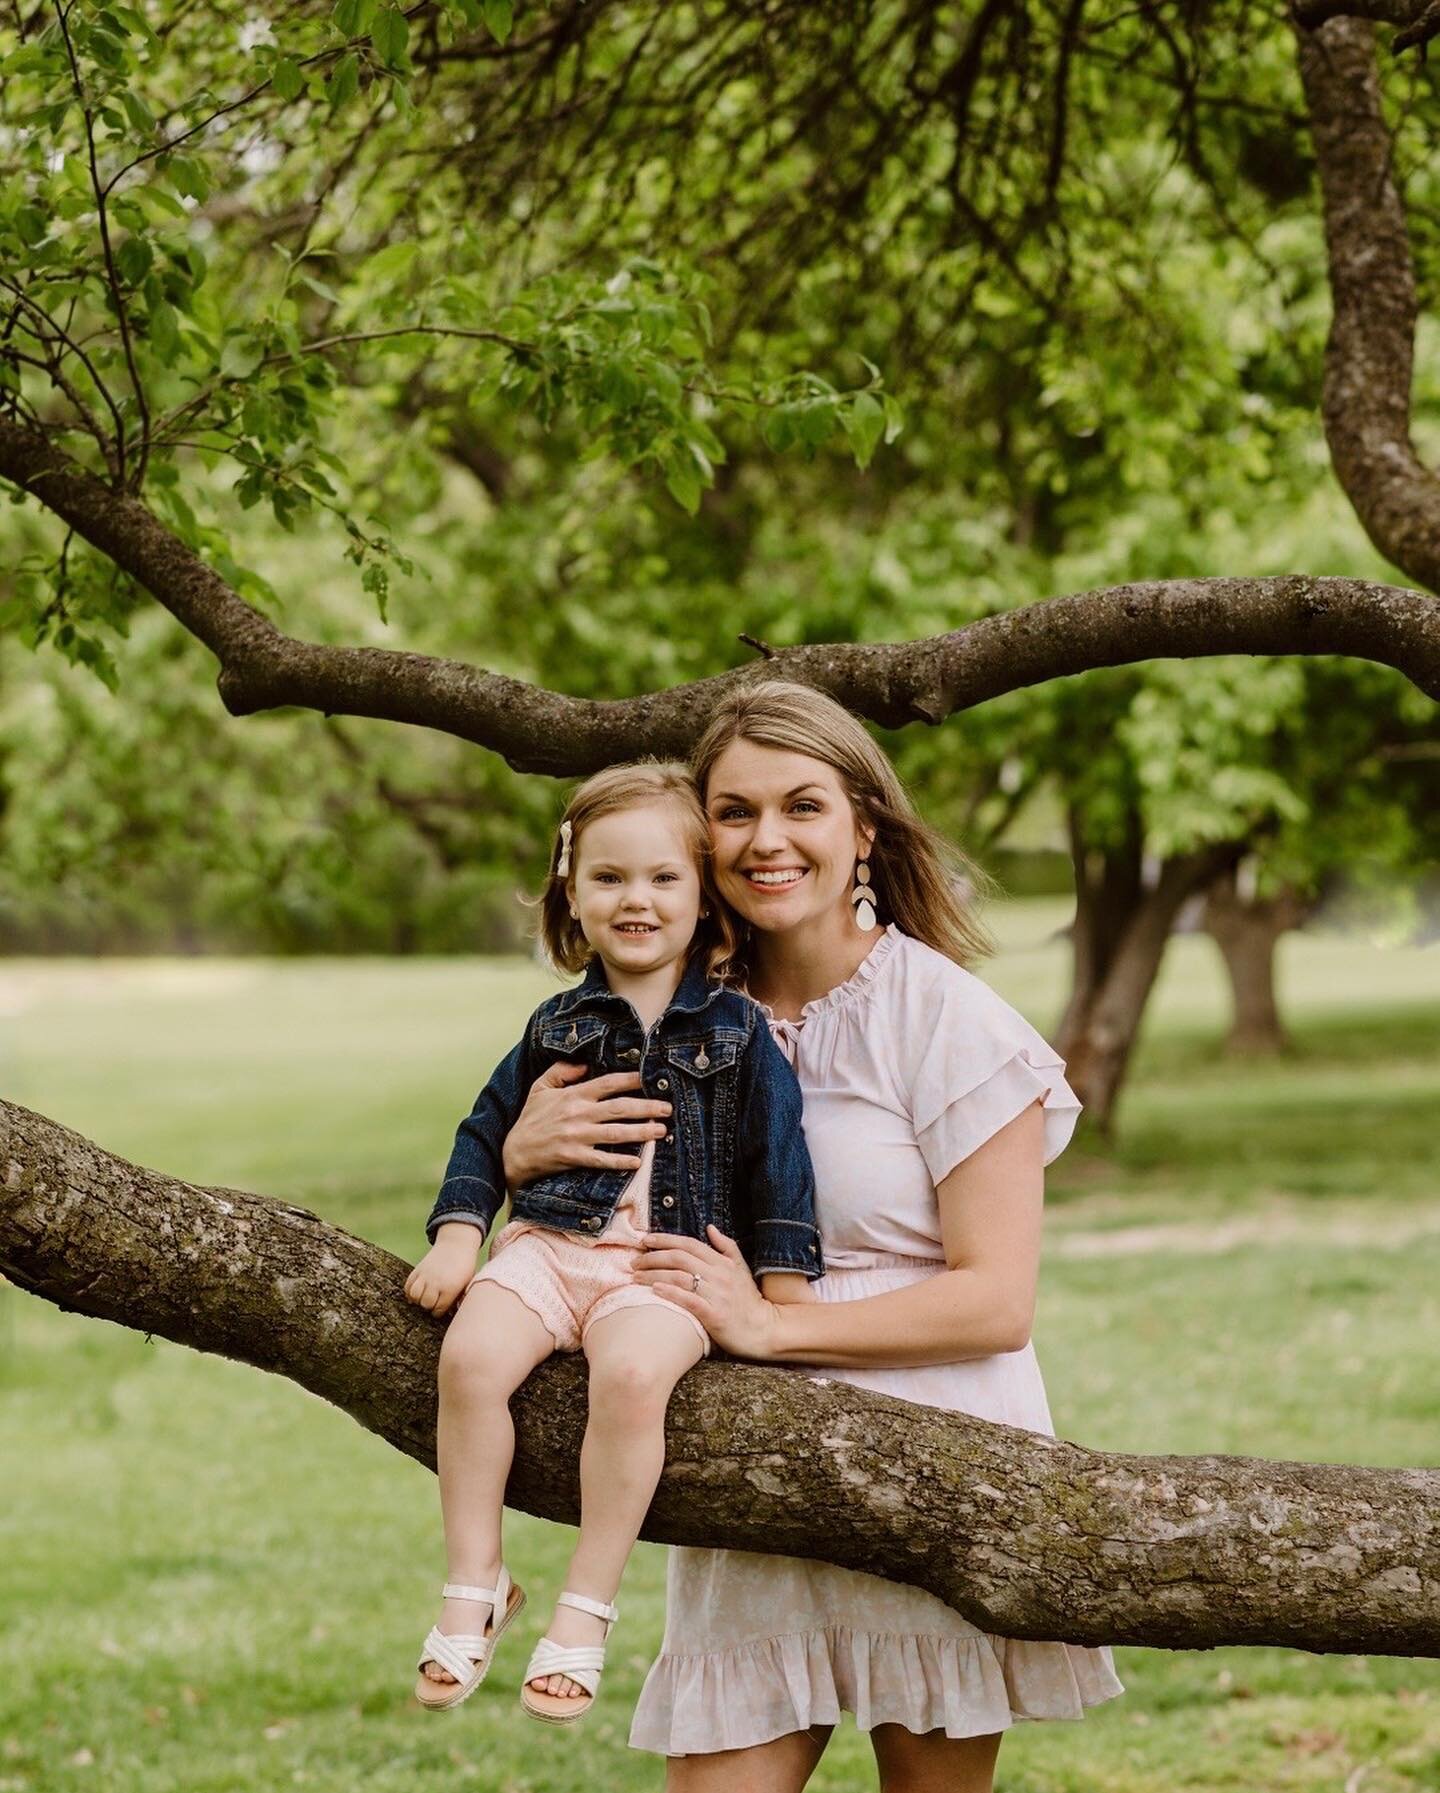 Completely obsessed with ALL the Mommy&amp;Me minis I shot this past weekend.🥰
⠀⠀⠀⠀⠀⠀⠀⠀⠀
So thankful for those of you who moved your session time to beat the rain! 🌧️ 
⠀⠀⠀⠀⠀⠀⠀⠀⠀
McKenna and Josie! &hearts;️
It was so good to see you two! 
⠀⠀⠀⠀⠀⠀⠀⠀⠀